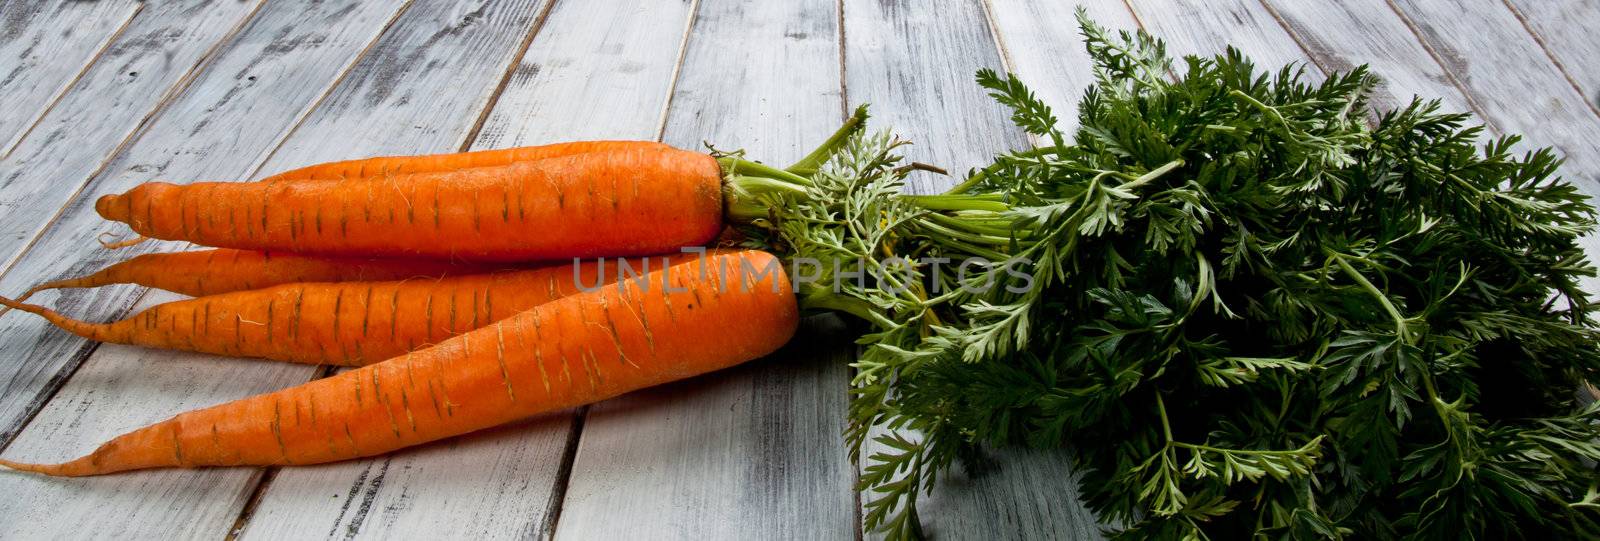 a fresh bunch of carrots on wood background